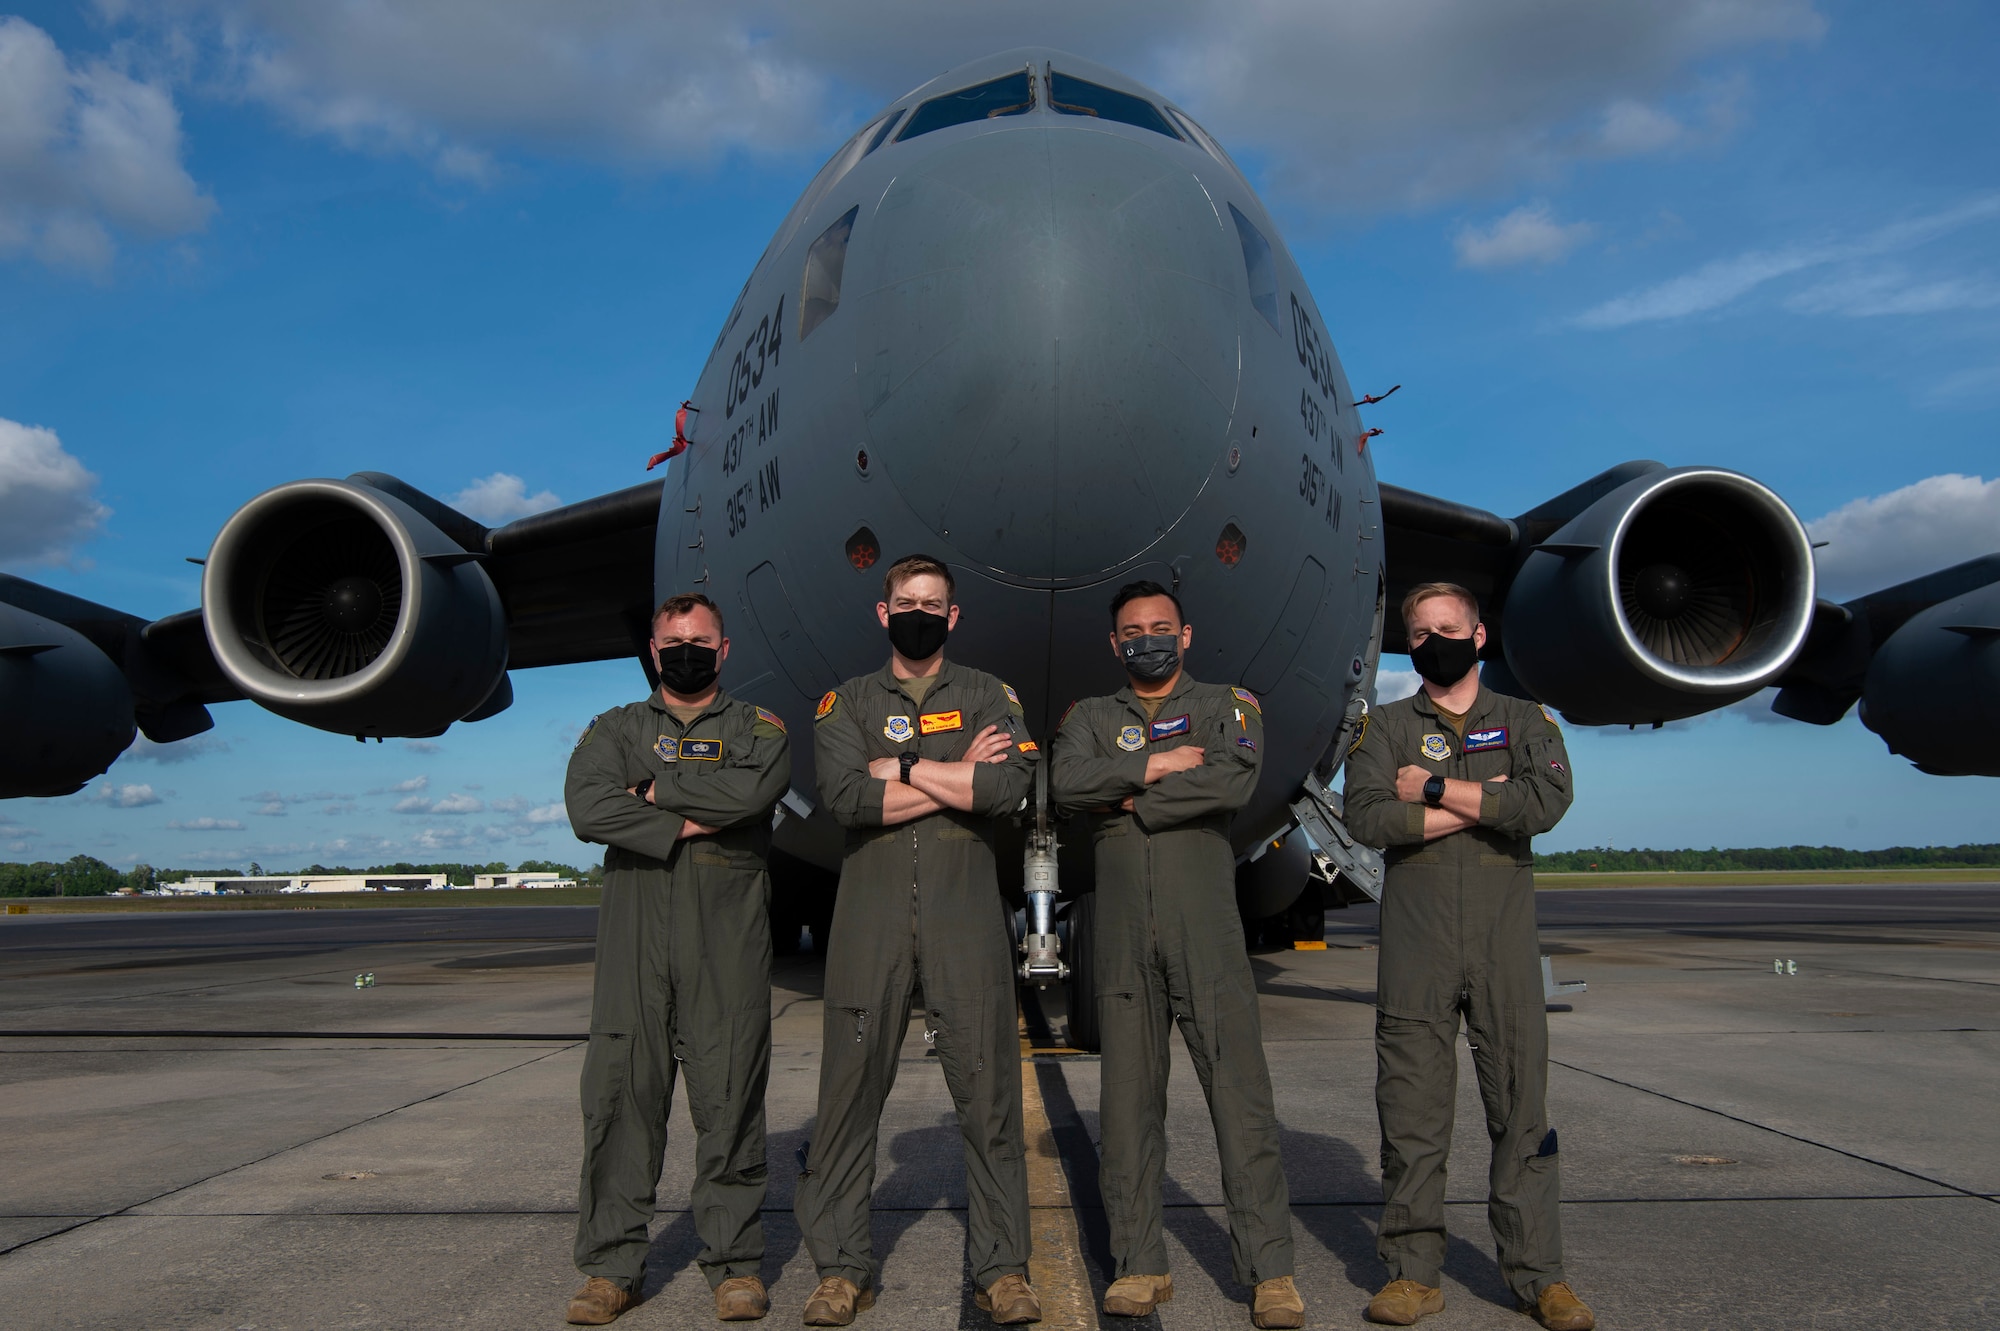 U.S. Air Force Airmen from the 437th Airlift Squadron, pose in front of a C-17 Globemaster III, at Joint Base Charleston, S.C., April 27, 2021.